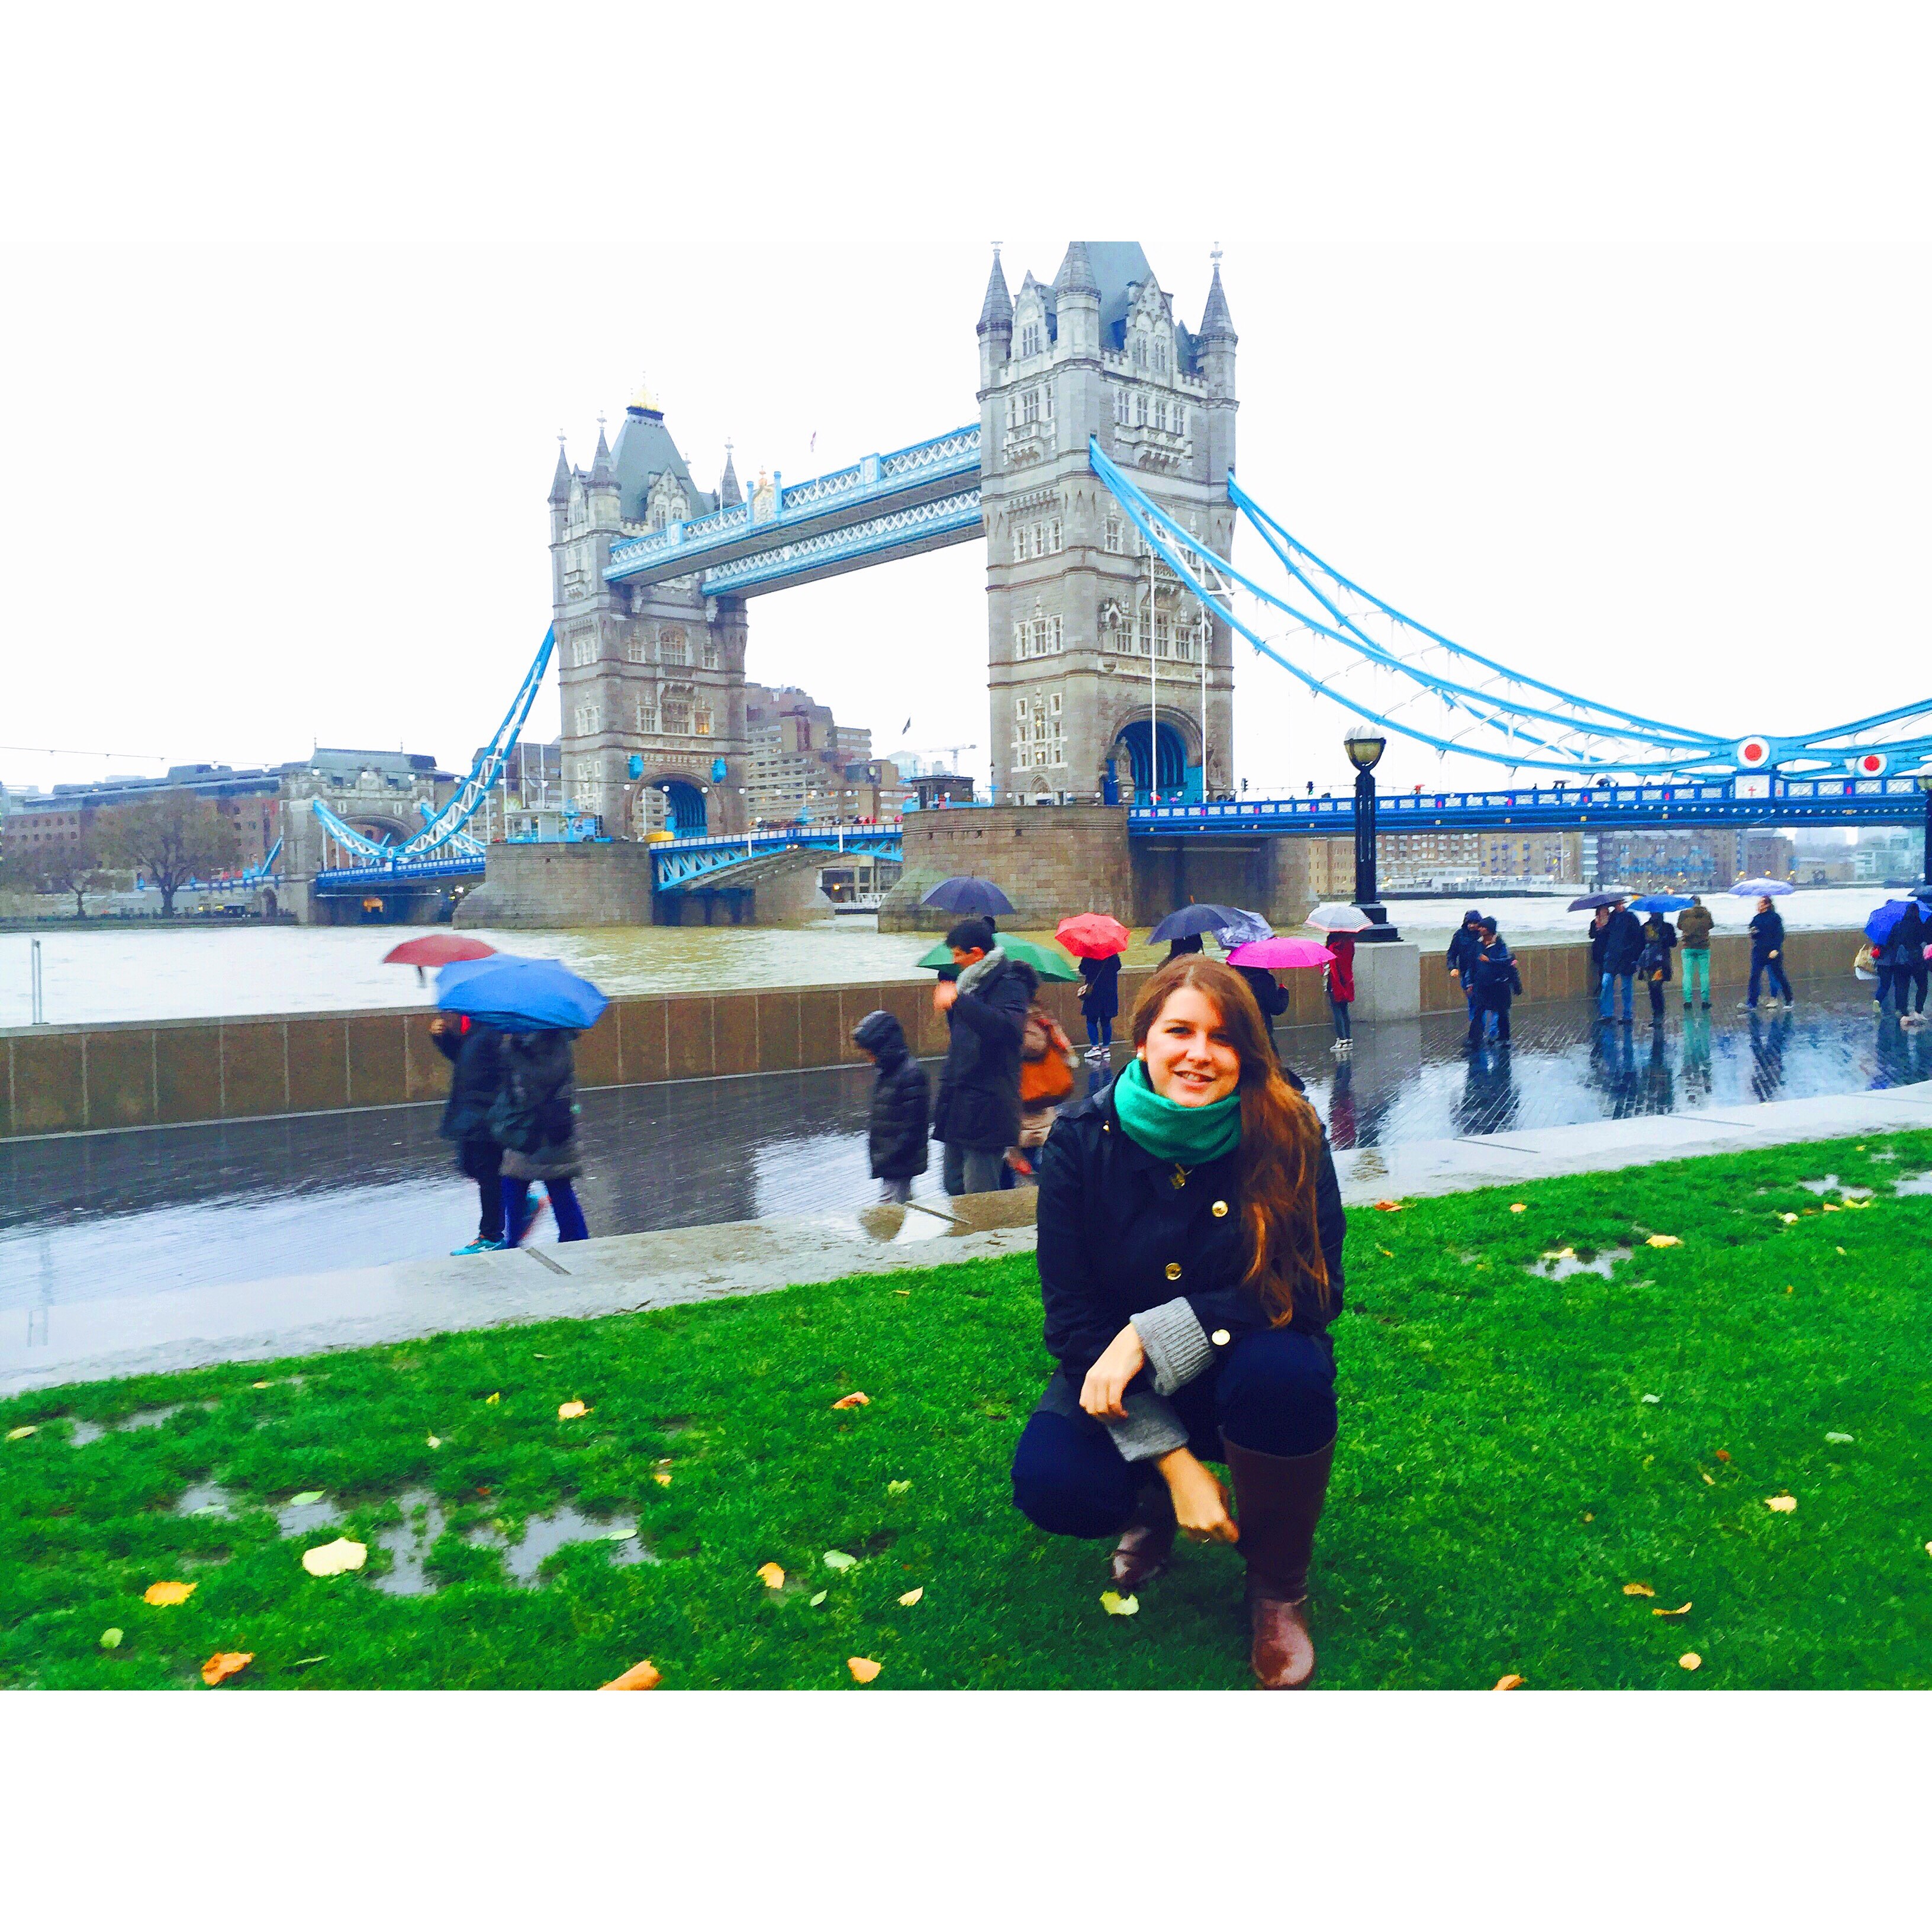 Bethany in the UK